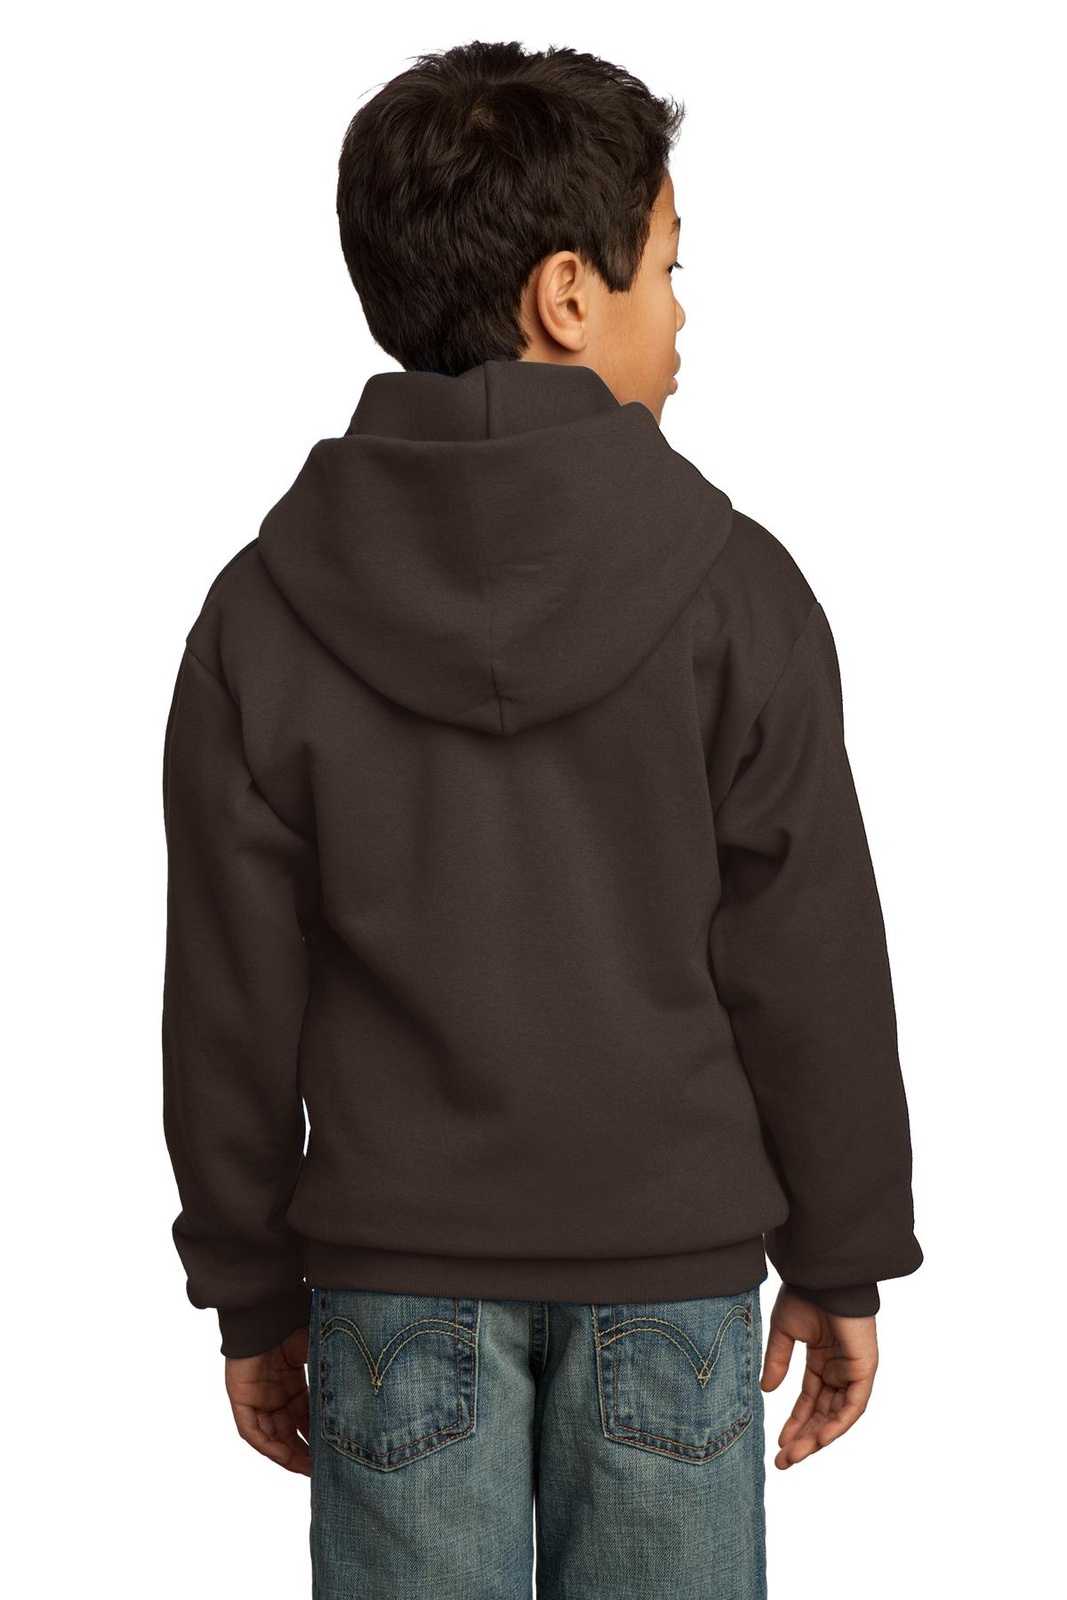 Port & Company PC90YH Youth Core Fleece Pullover Hooded Sweatshirt - Dark Chocolate Brown - HIT a Double - 1